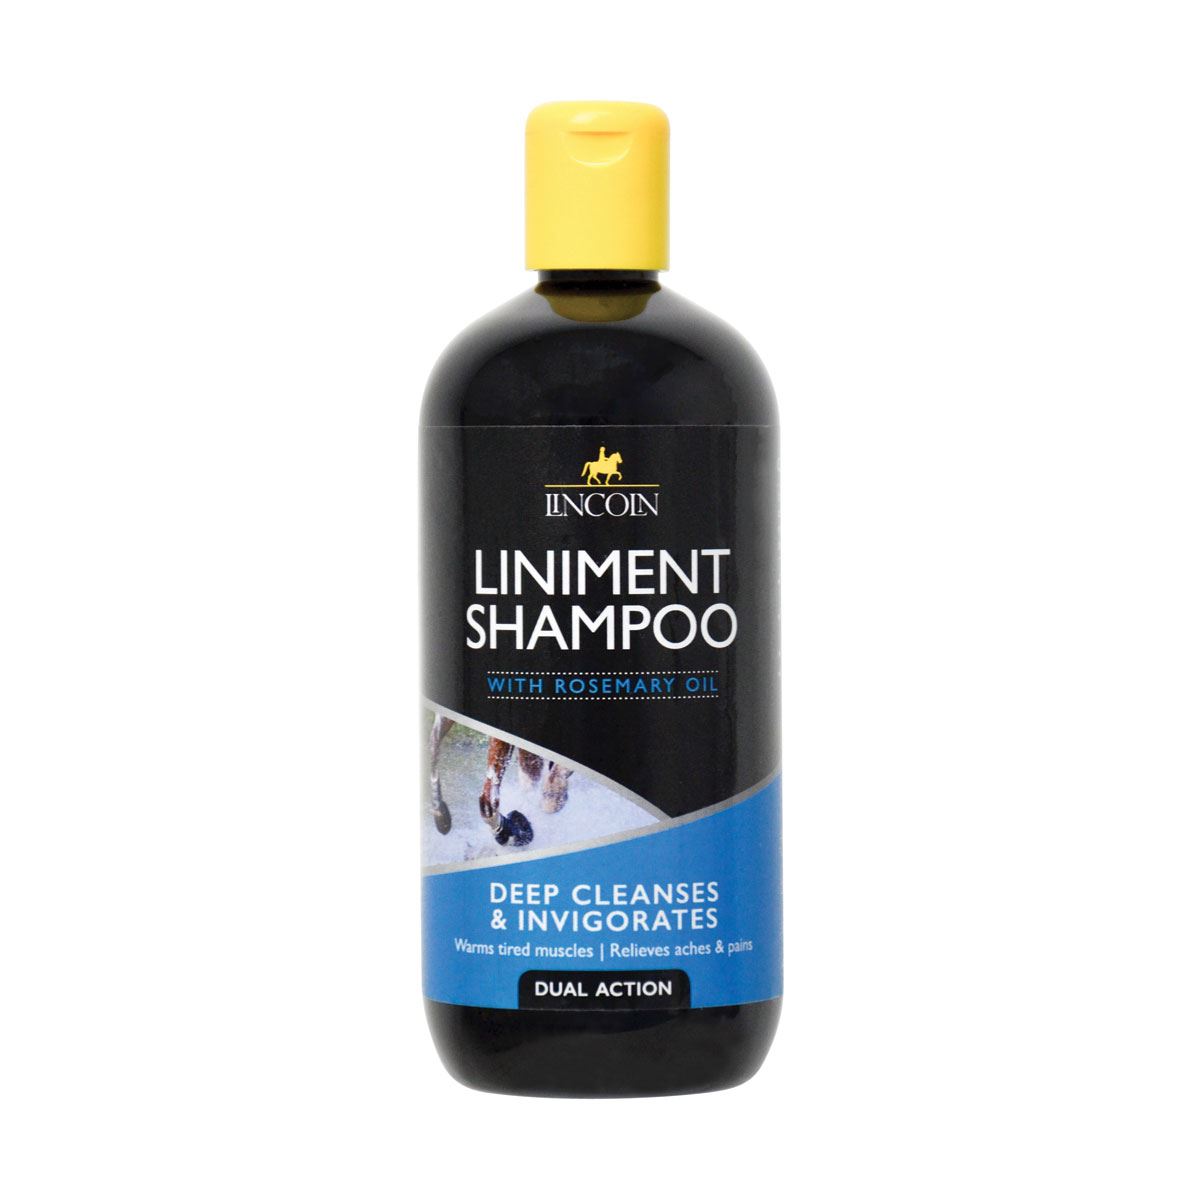 Lincoln Liniment Shampoo - Just Horse Riders